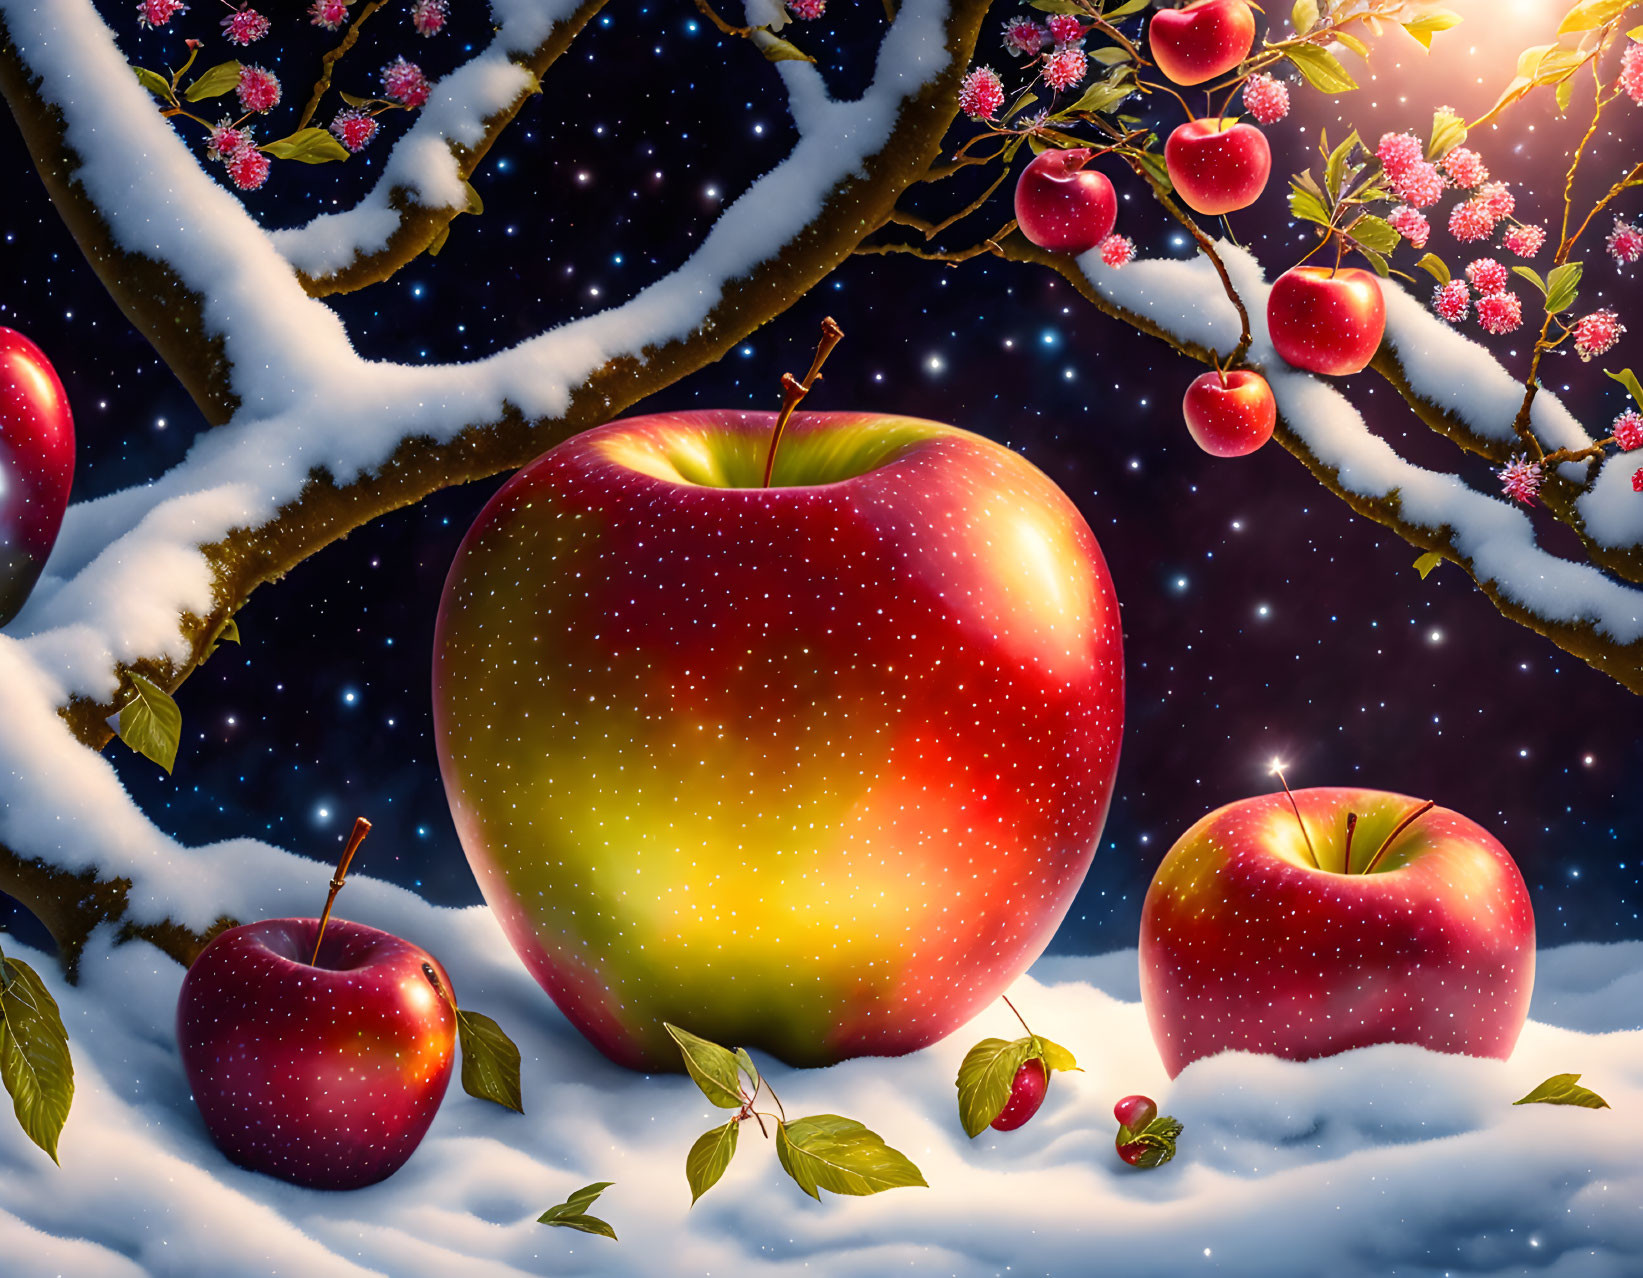 Vibrant red apples on snow-covered branches under starry sky and pink blossoms